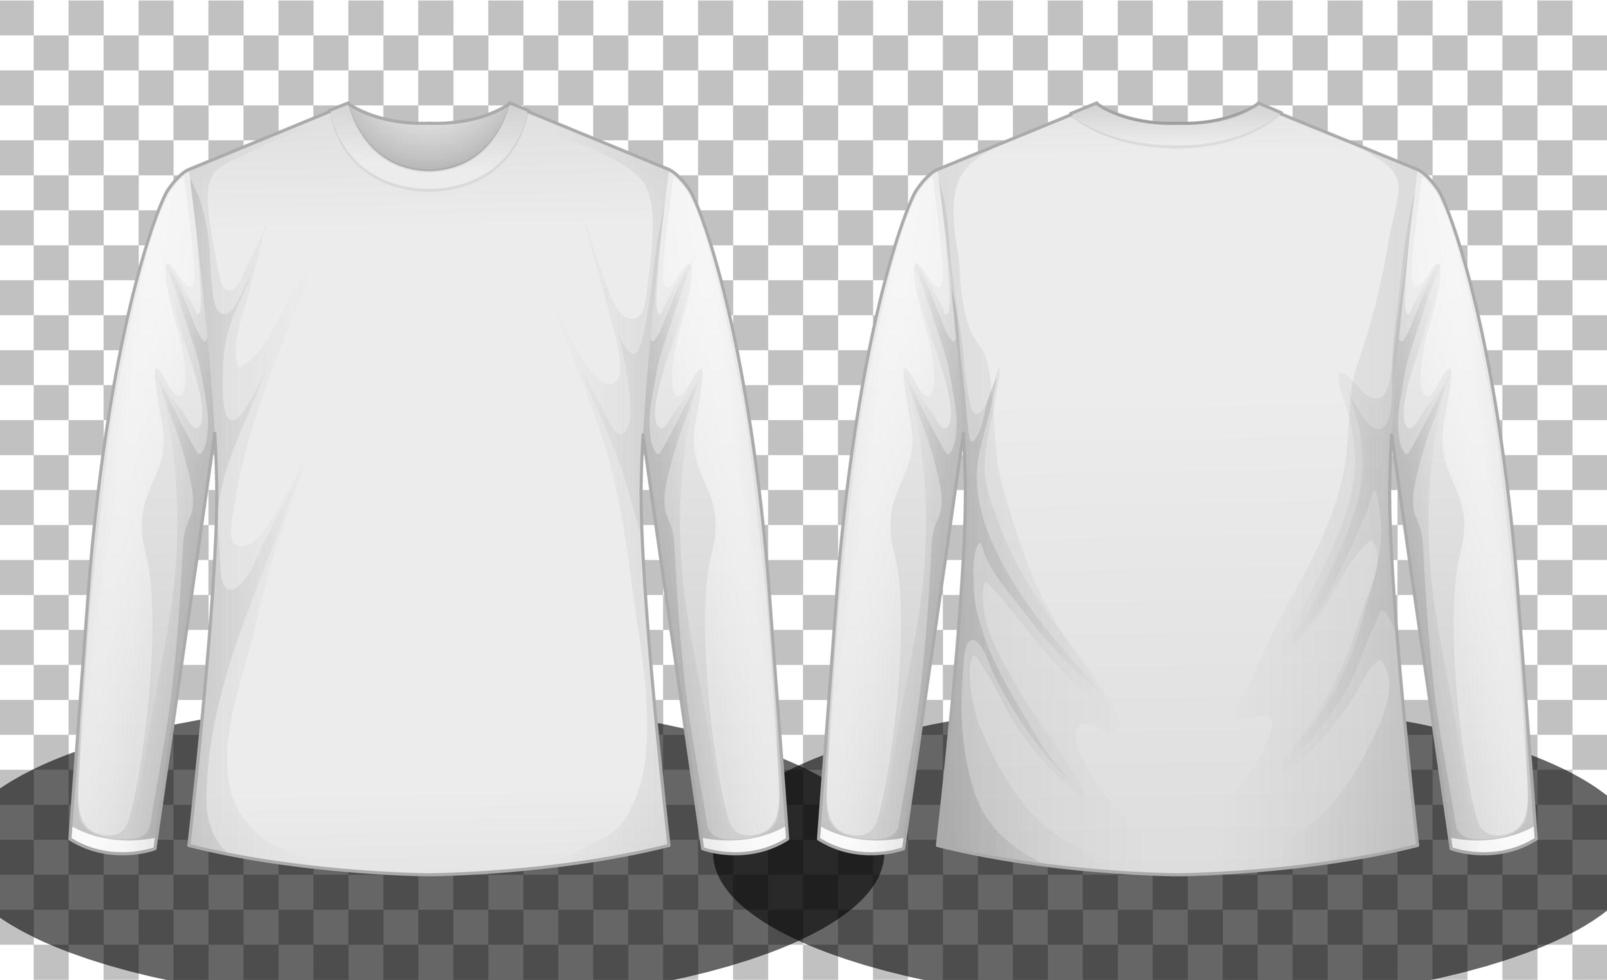 White long sleeve t-shirt front and back side vector